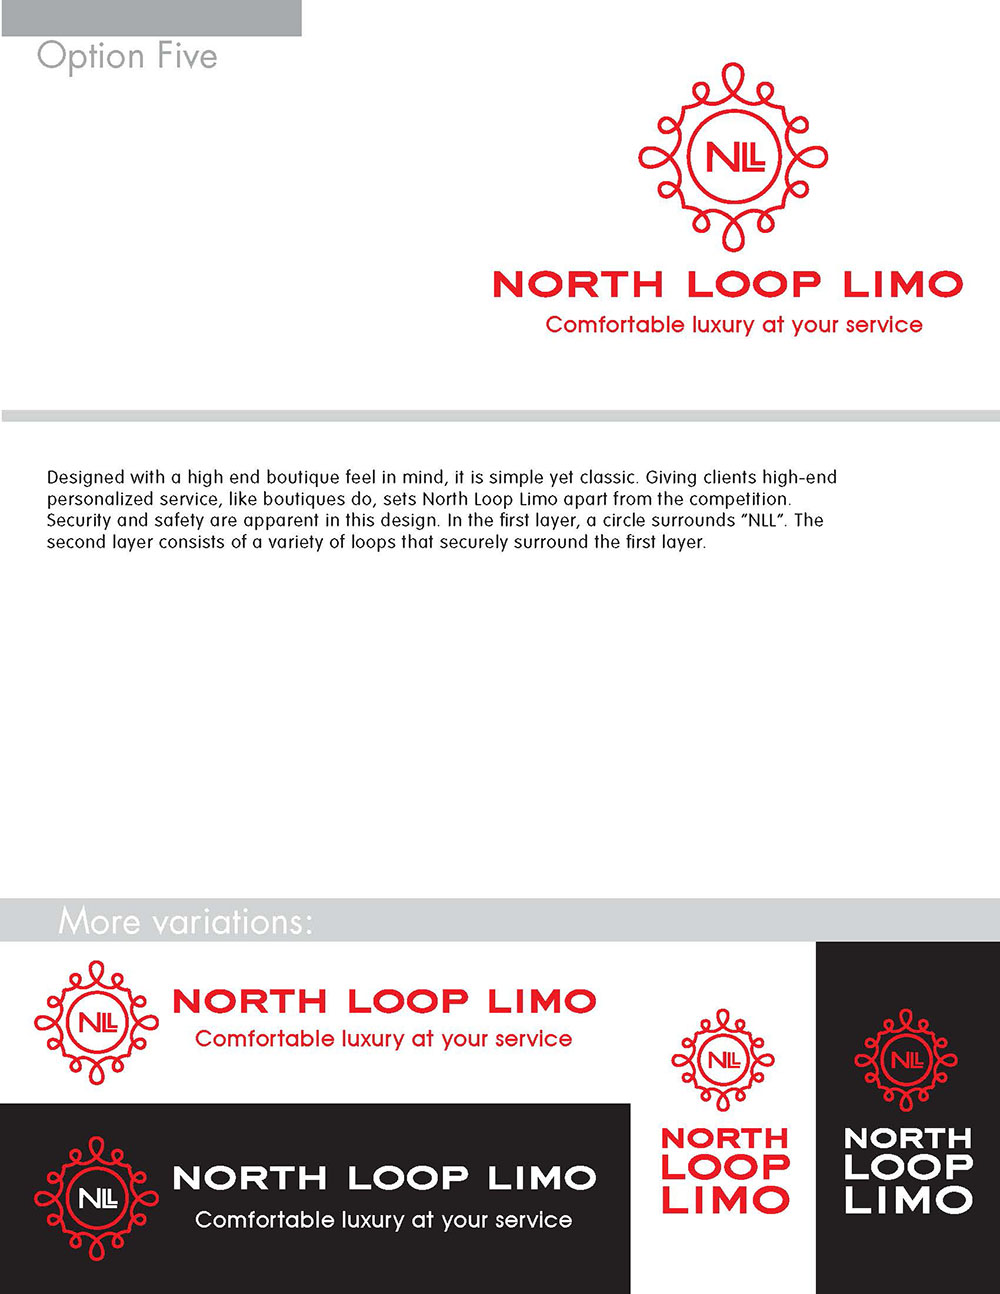 North Loop Limo Colored Concepts